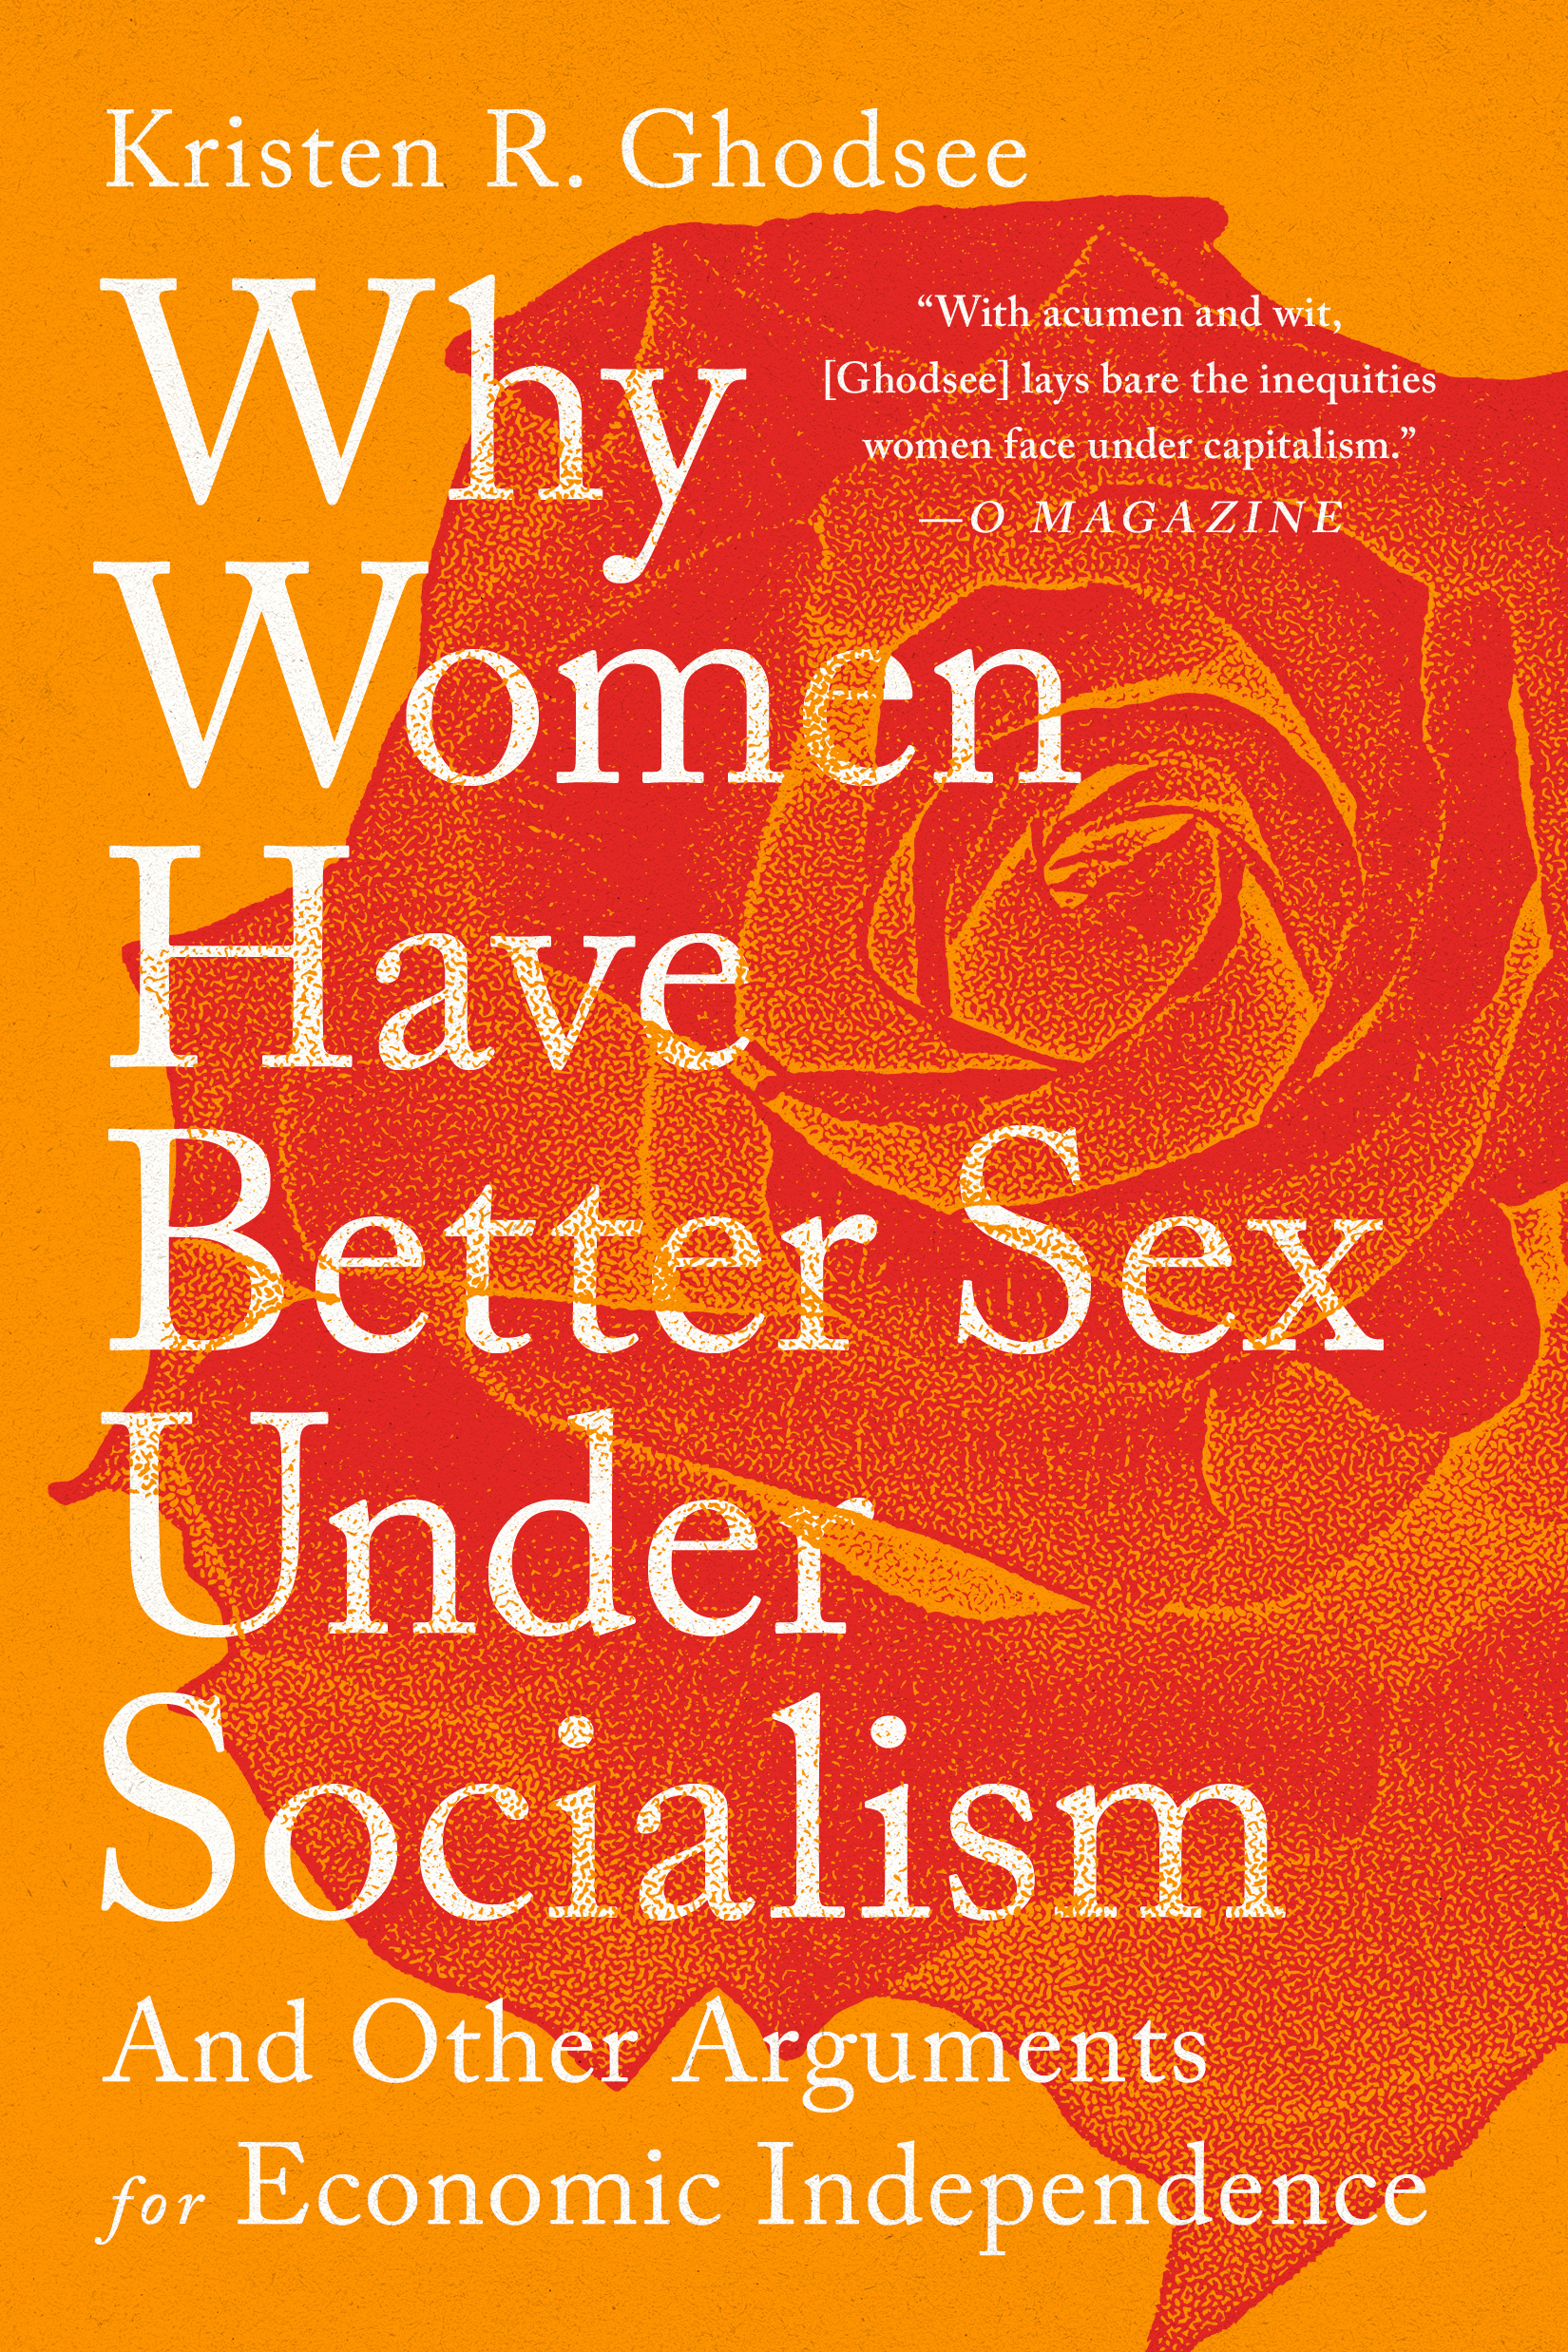 Sex Jewish Women In Concentration Camps Experiments - Why Women Have Better Sex Under Socialism by Kristen R. Ghodsee | Hachette  Book Group